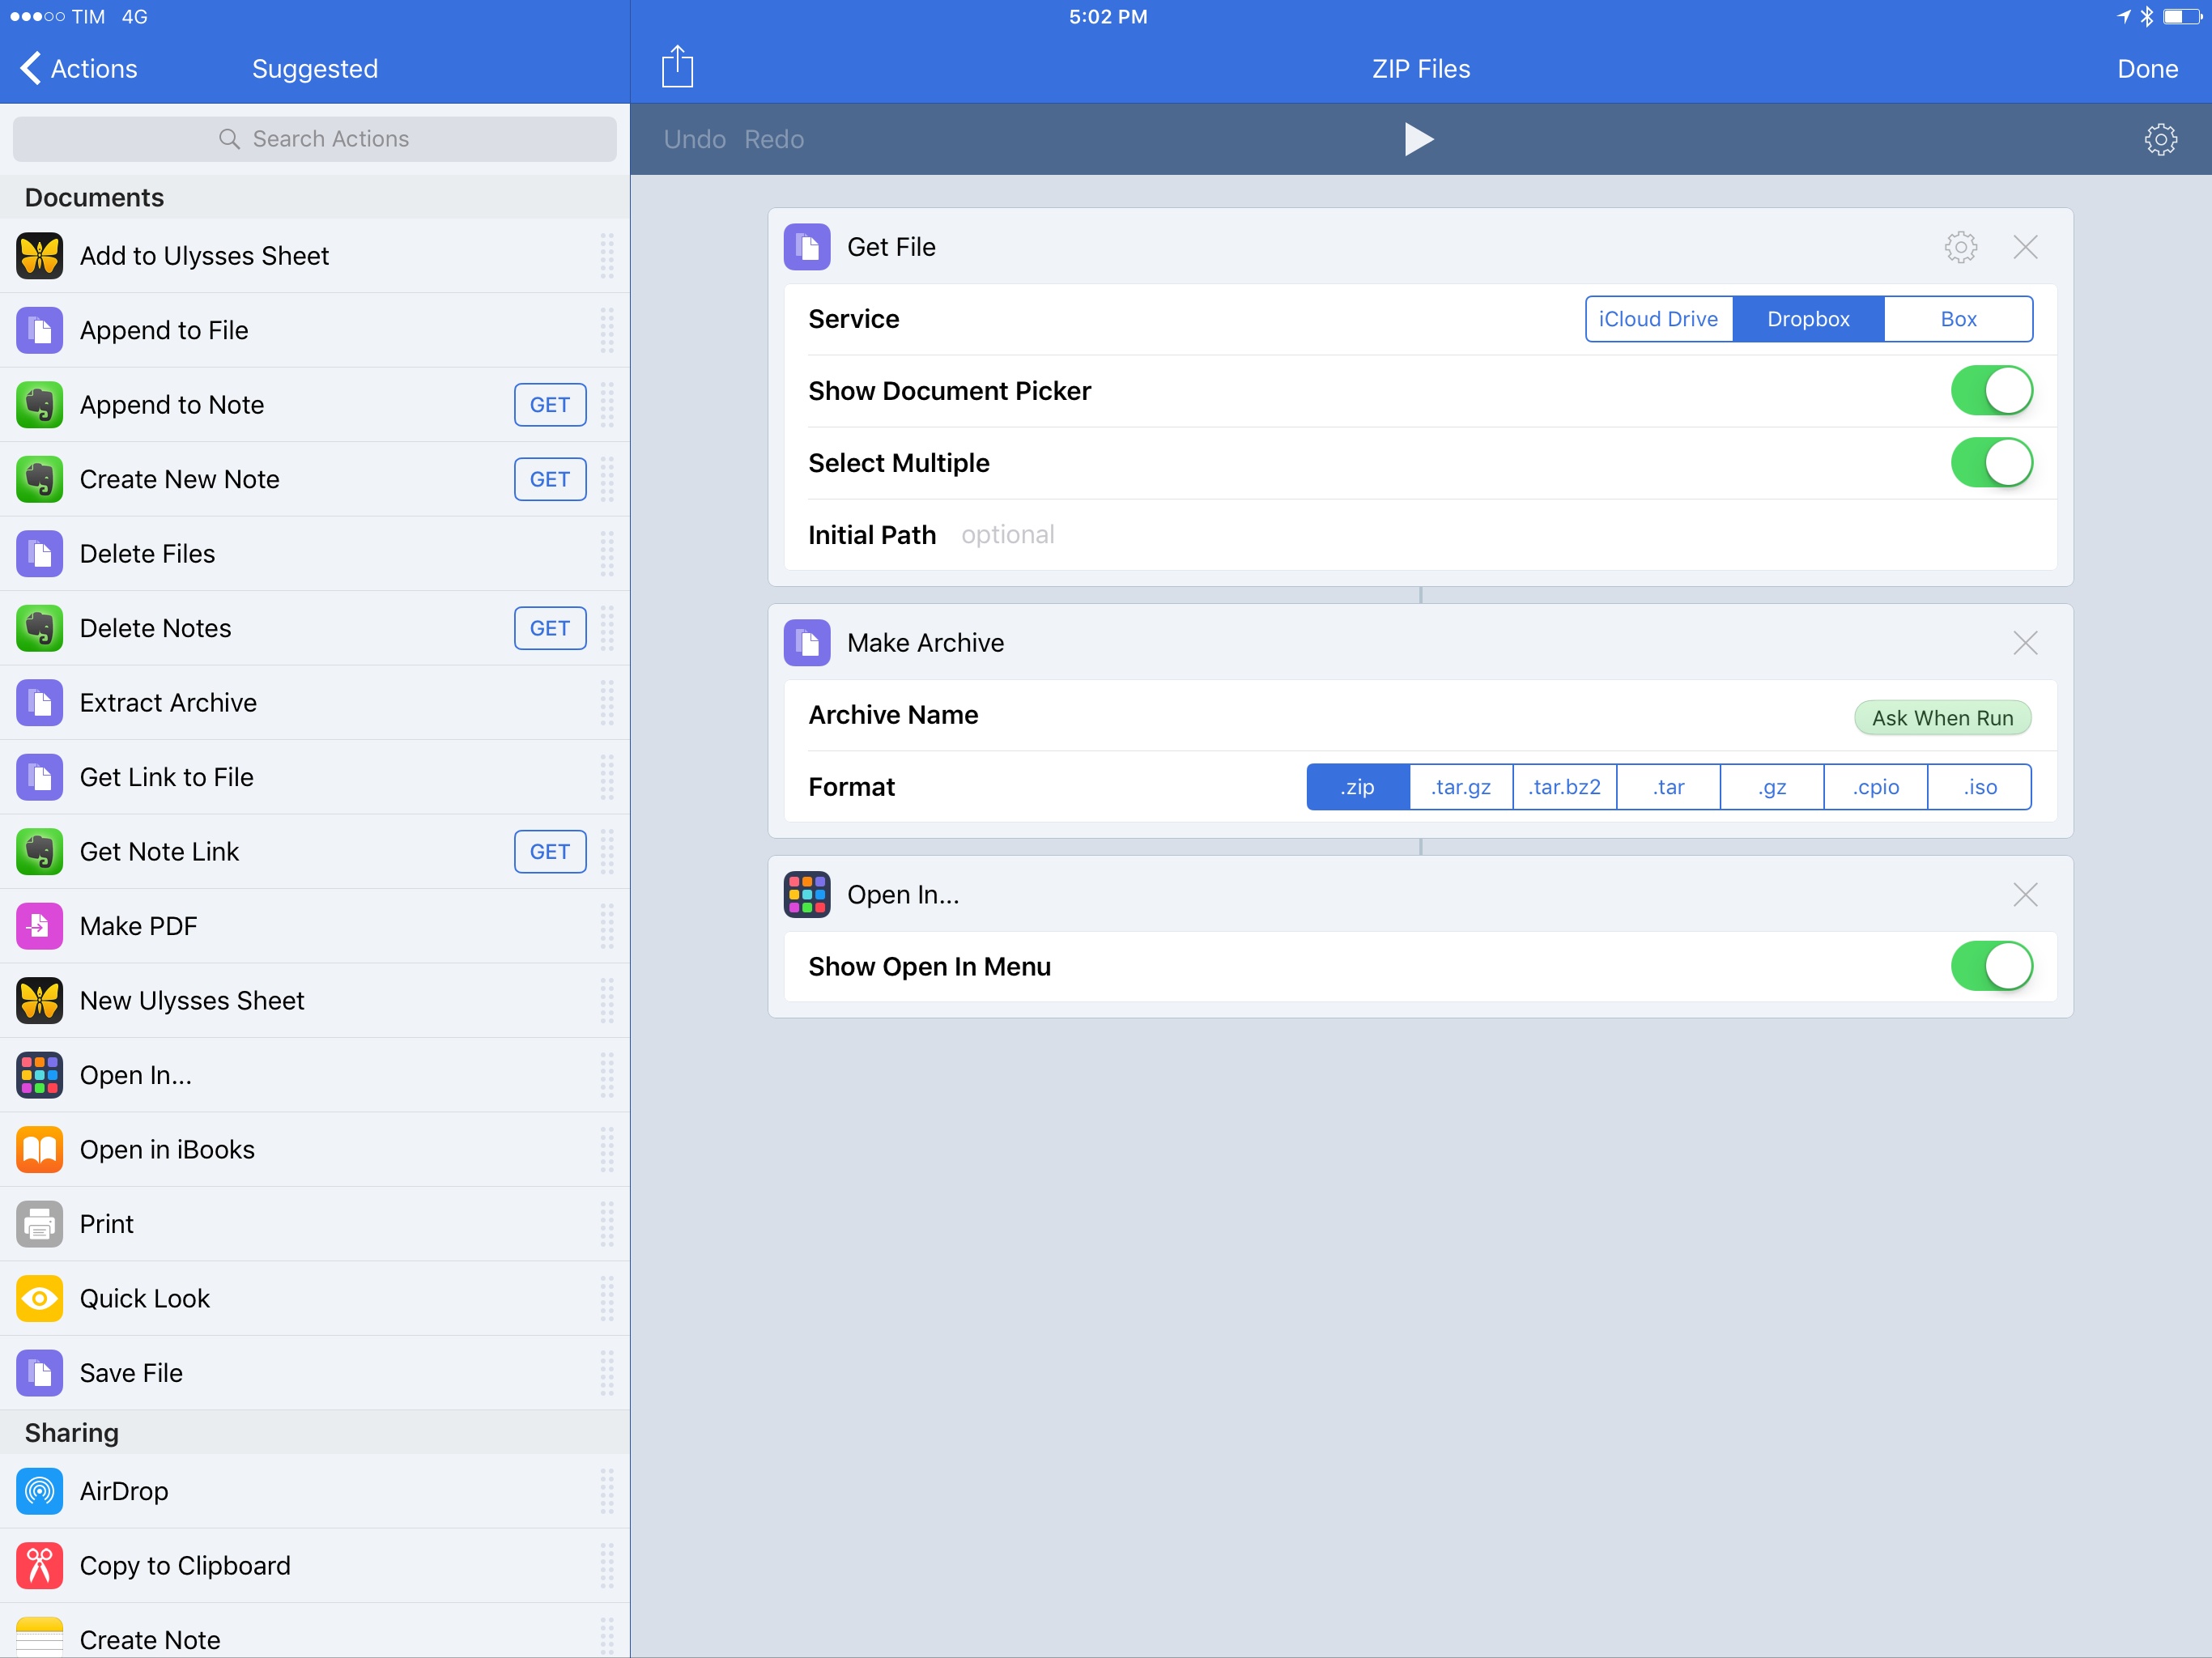 Workflow's 'Make Archive' action turns multiple files into an archive.